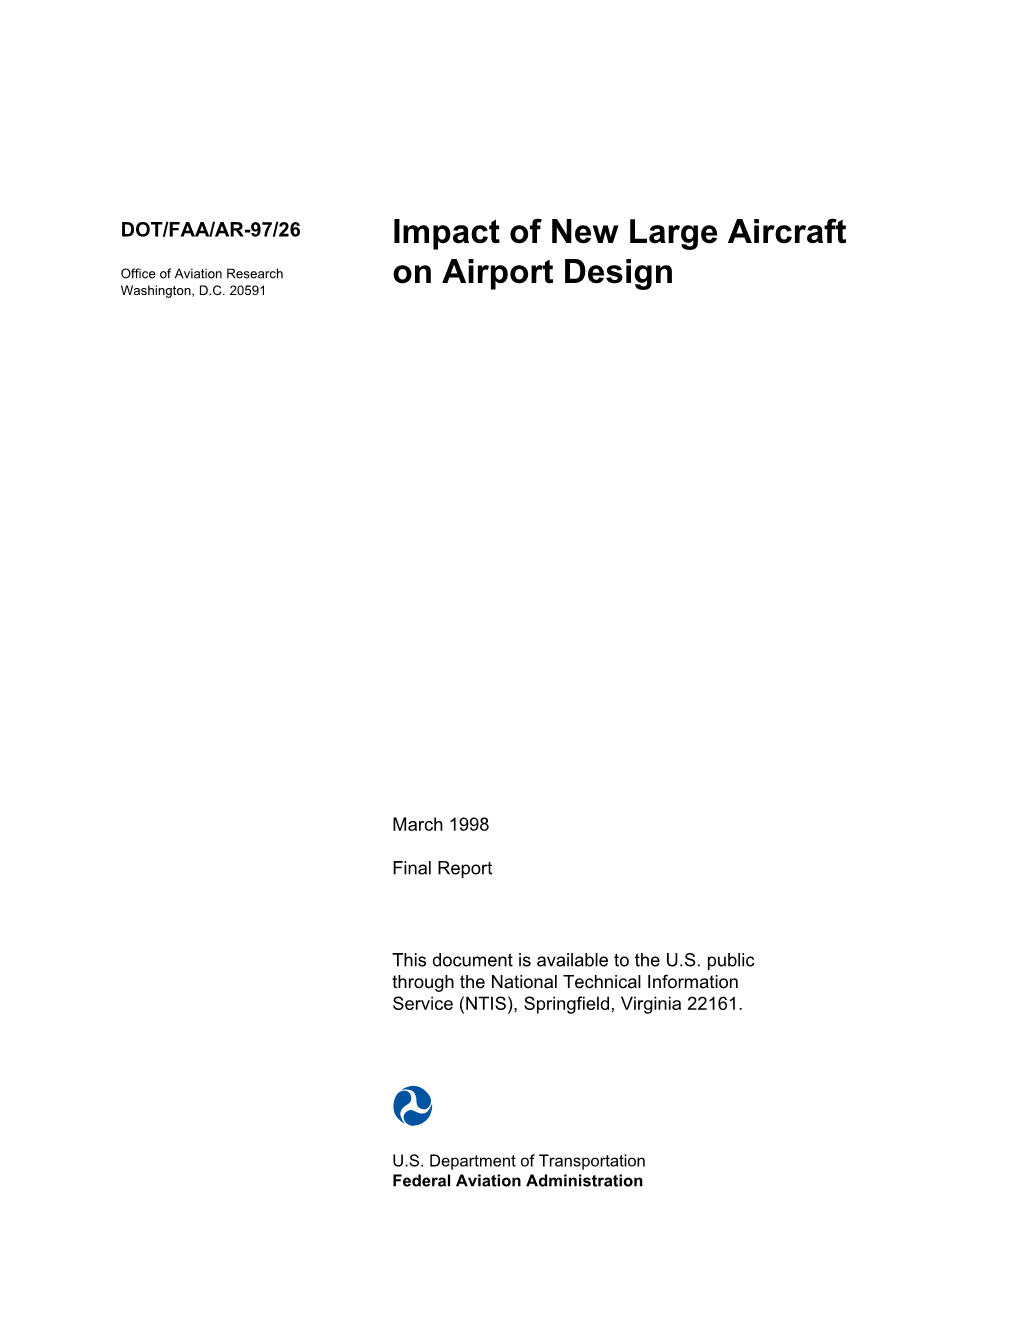 IMPACT of NEW LARGE AIRCRAFT on AIRPORT DESIGN March 1998 6